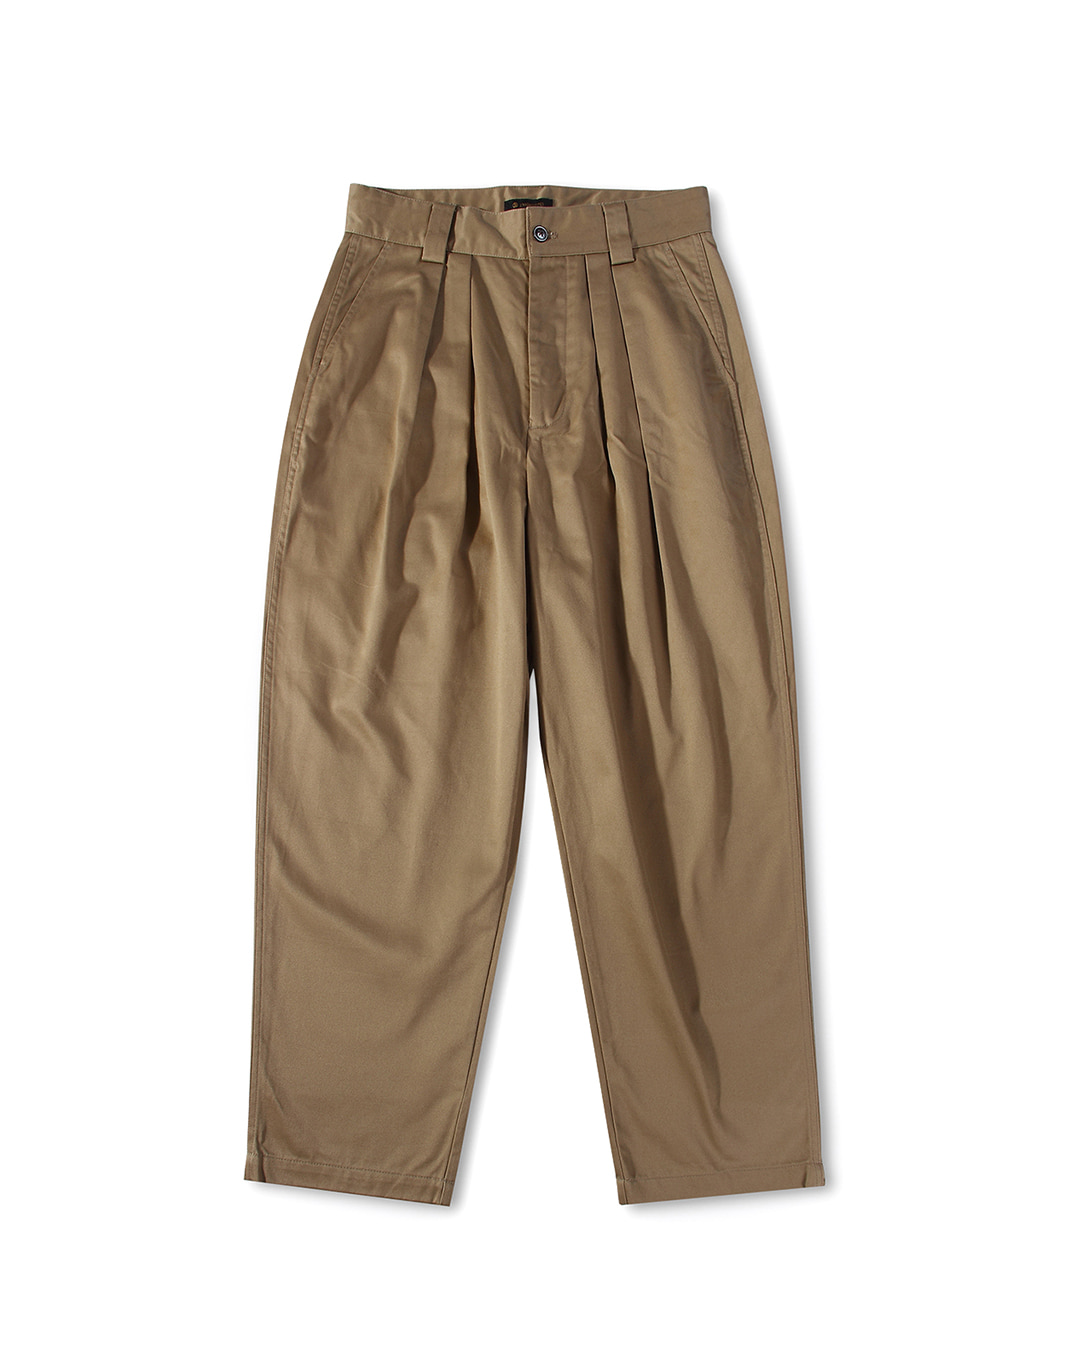 PLEATED TROUSERS (beige)